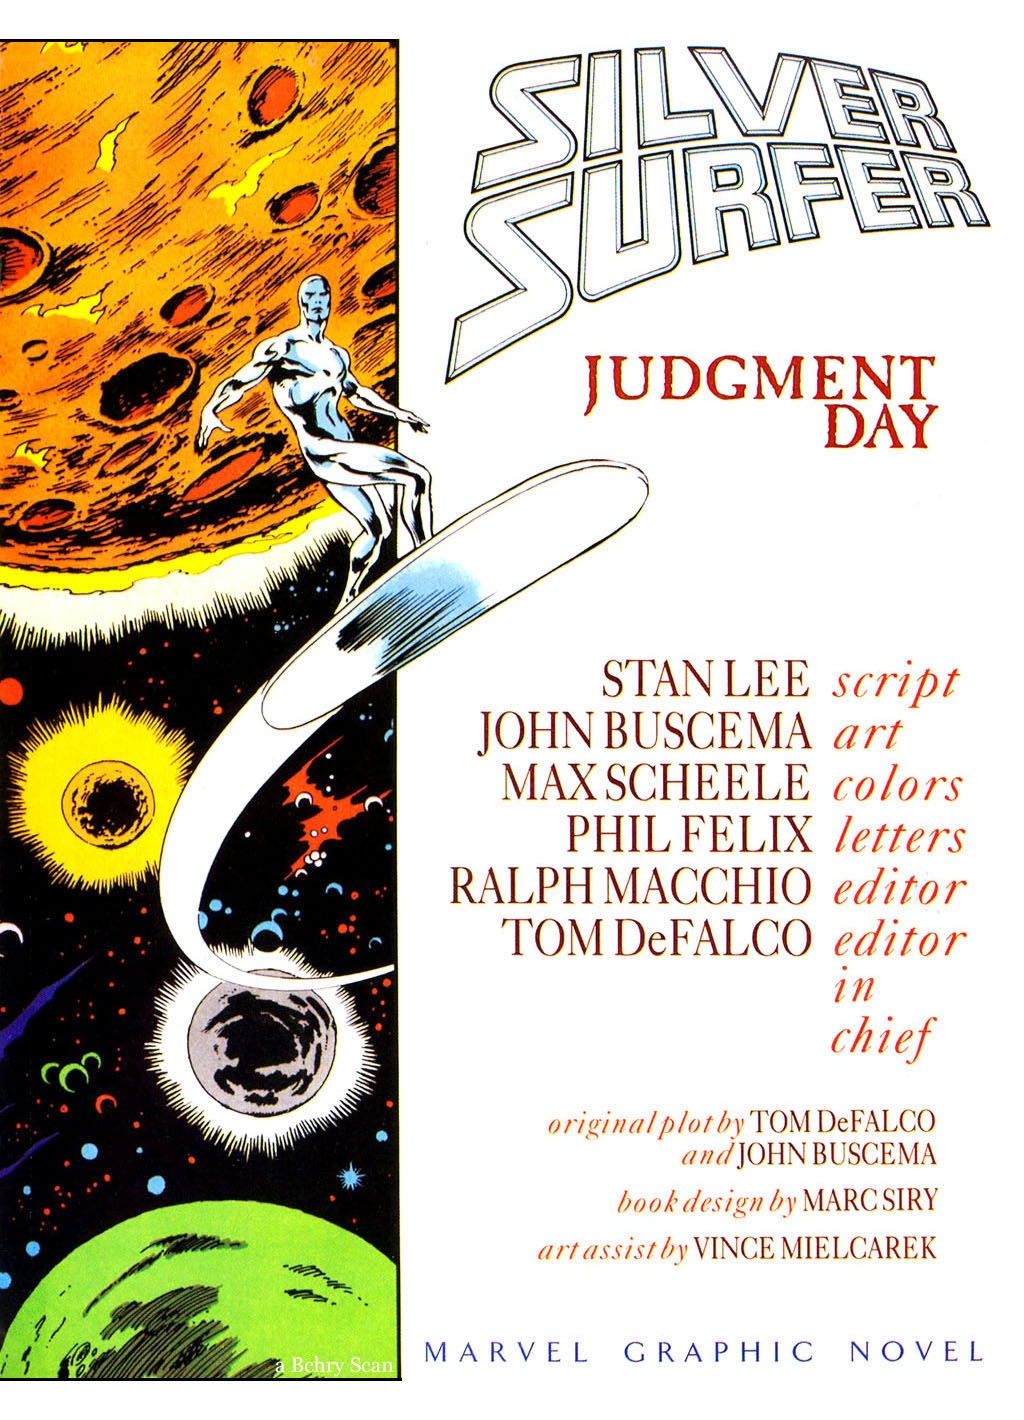 Read online Marvel Graphic Novel comic -  Issue #38 - Silver Surfer - Judgment Day - 2